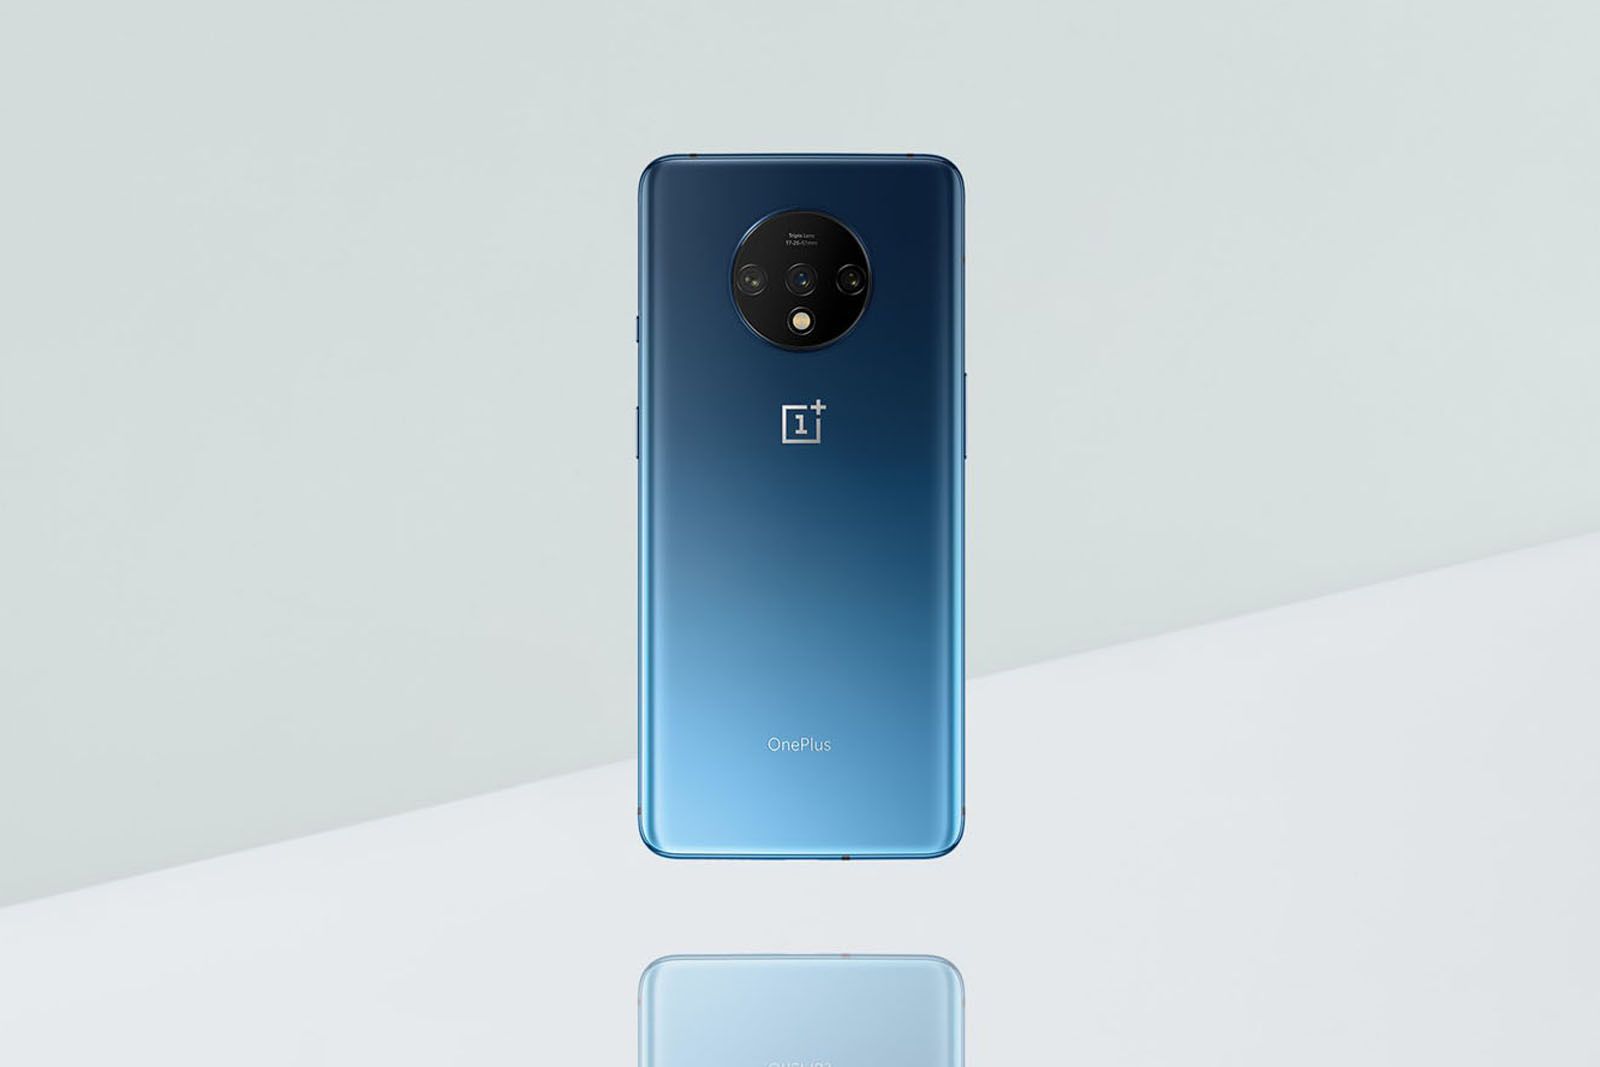 The OnePlus 7T will launch with Android 10 image 1